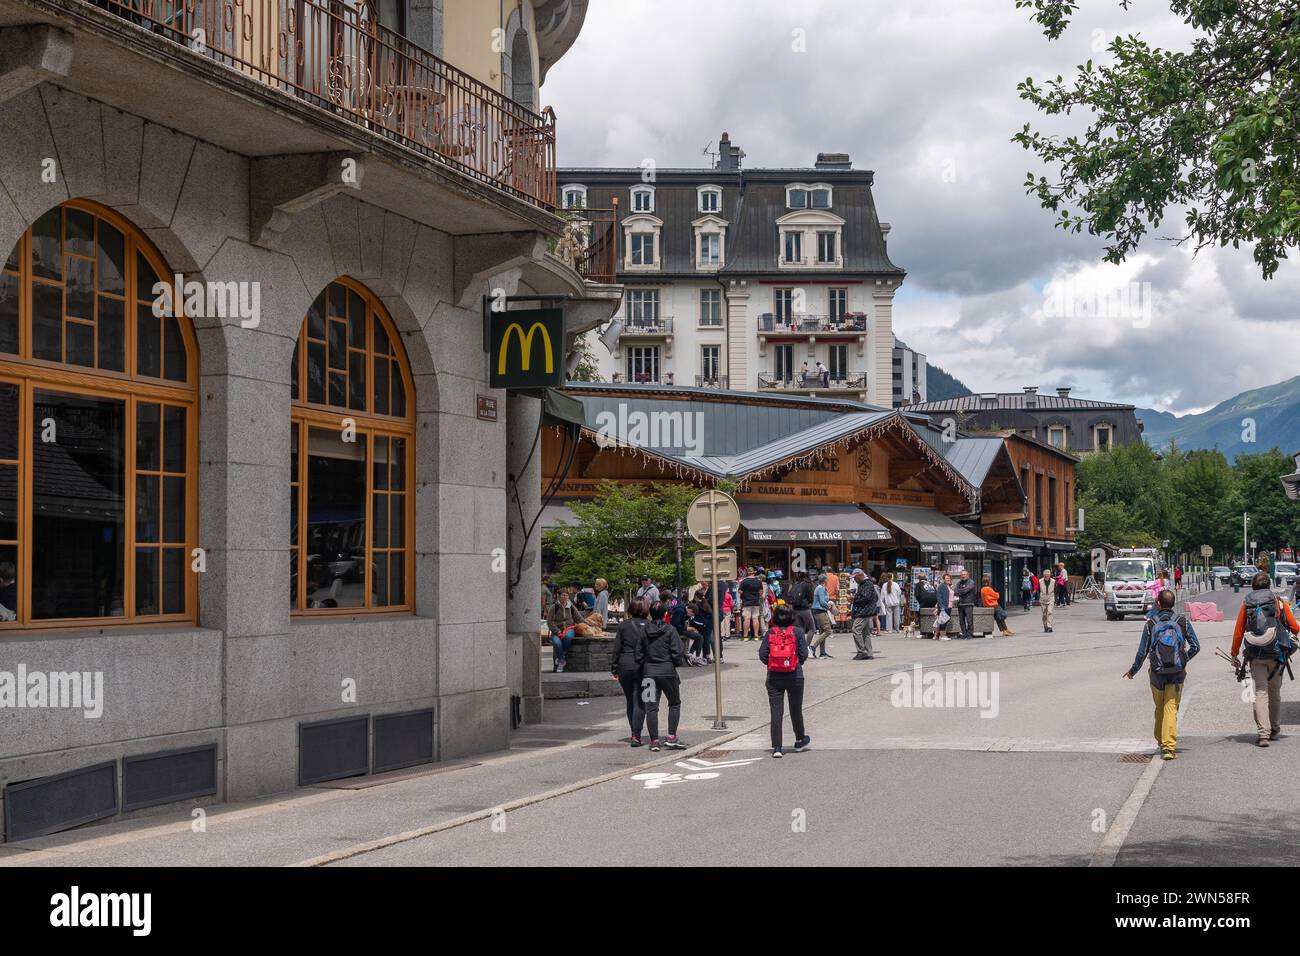 Exterior of a McDonald's fast food restaurant in the centre of the alpine town with hikers, Chamonix, Haute Savoie, Auvergne Rhone Alpes, France Stock Photo